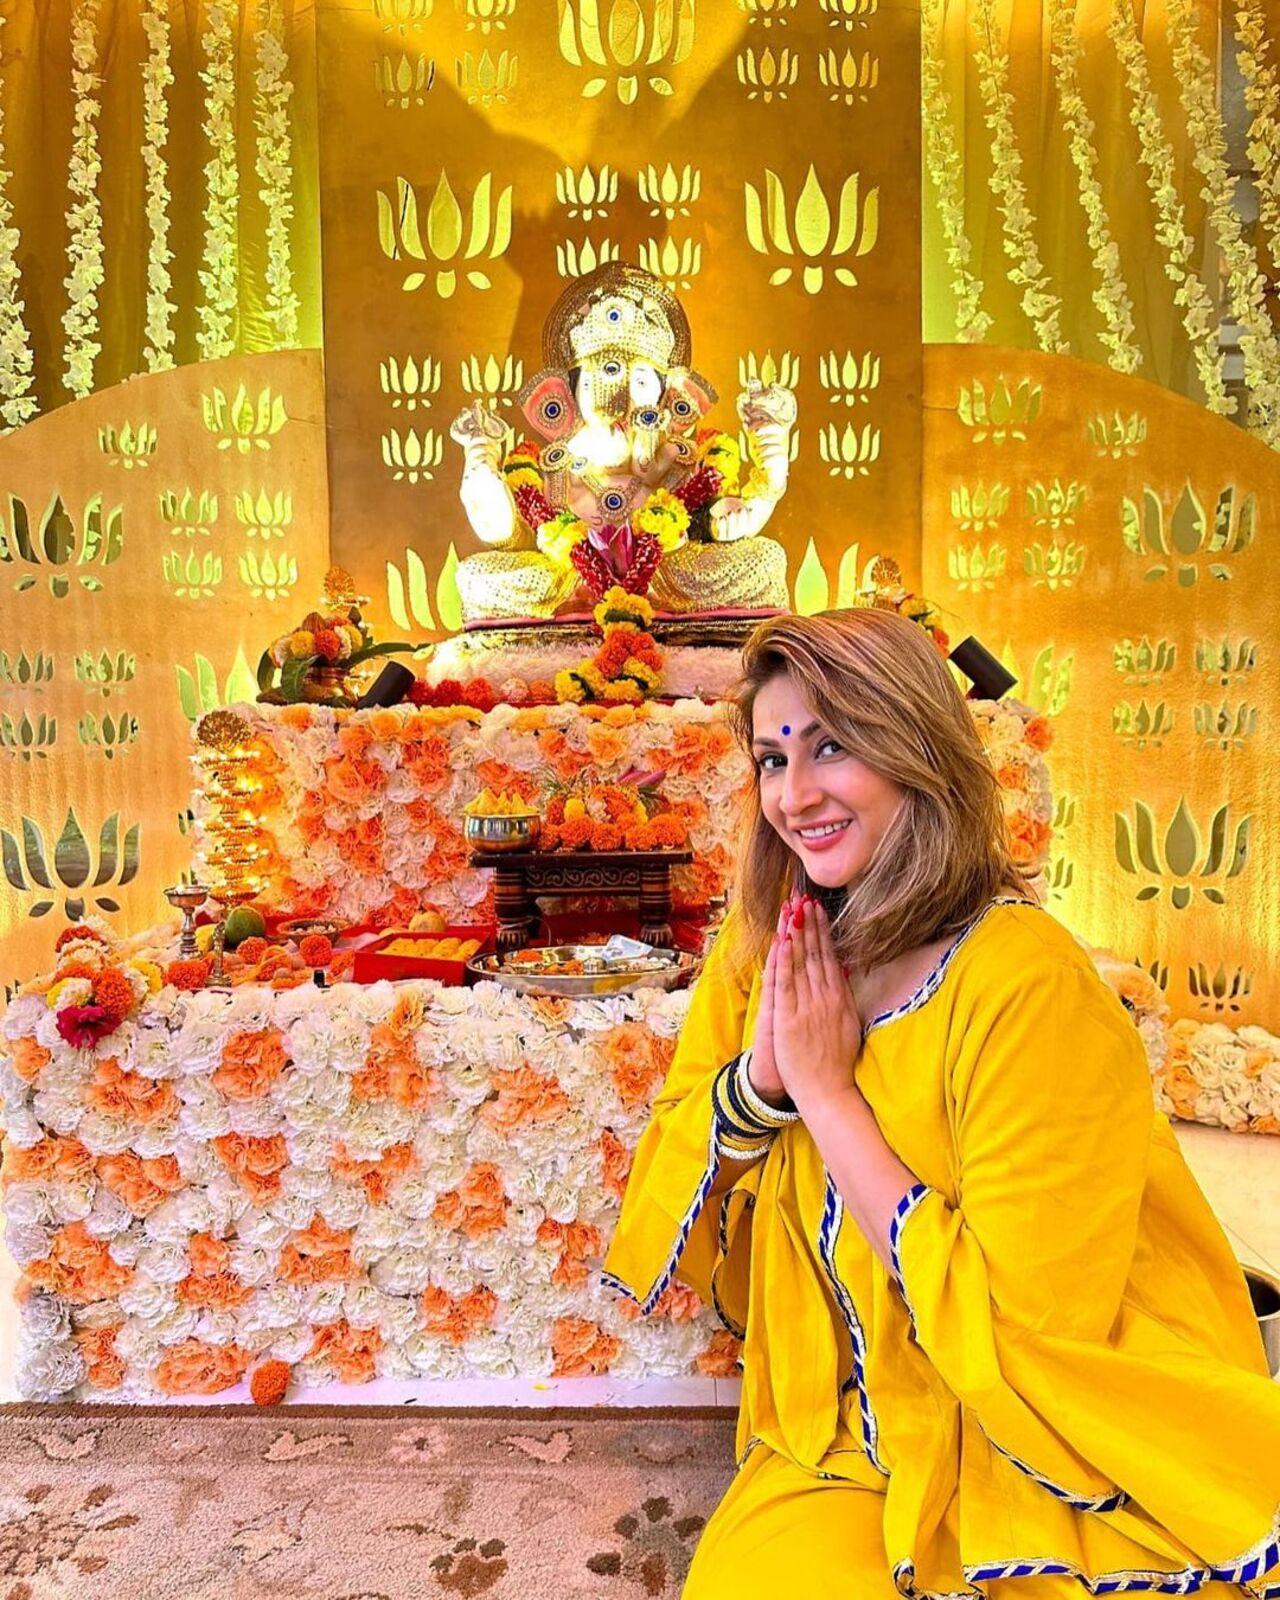 Urvashi Dholakia and her sons welcomed Ganpati home this year. The actress shared happy pictures from the festival on Instagram